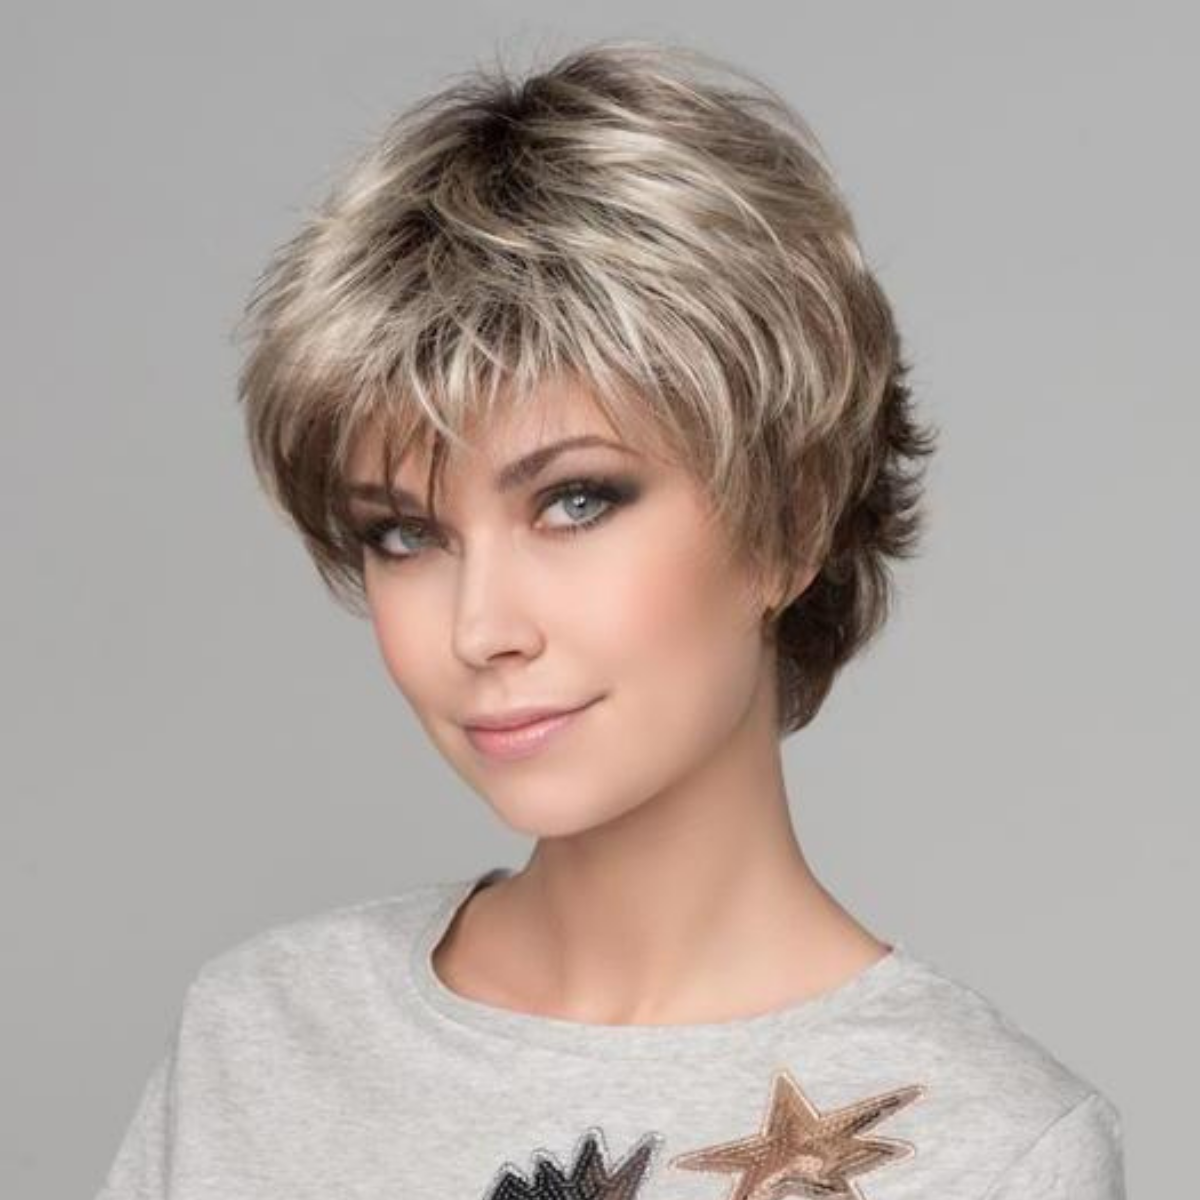 Club 10  - Hair Power Collection by Ellen Wille